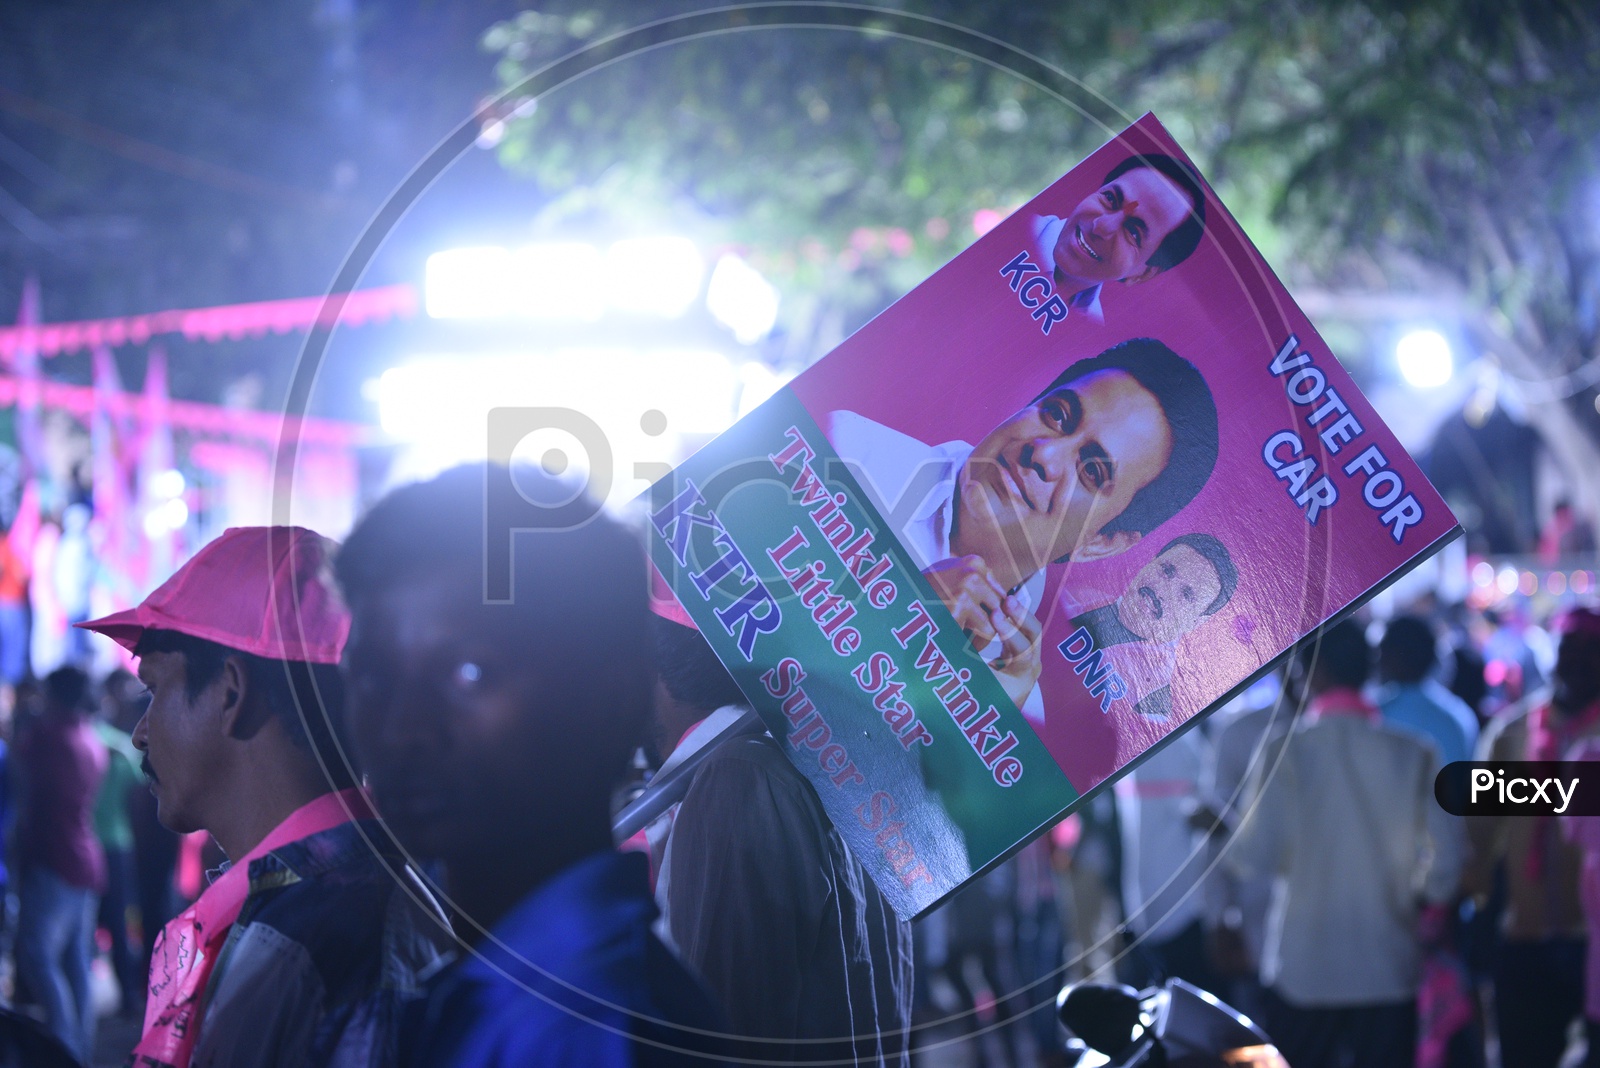 KTR/TRS Party  Placards  During elecion Campaign 2018